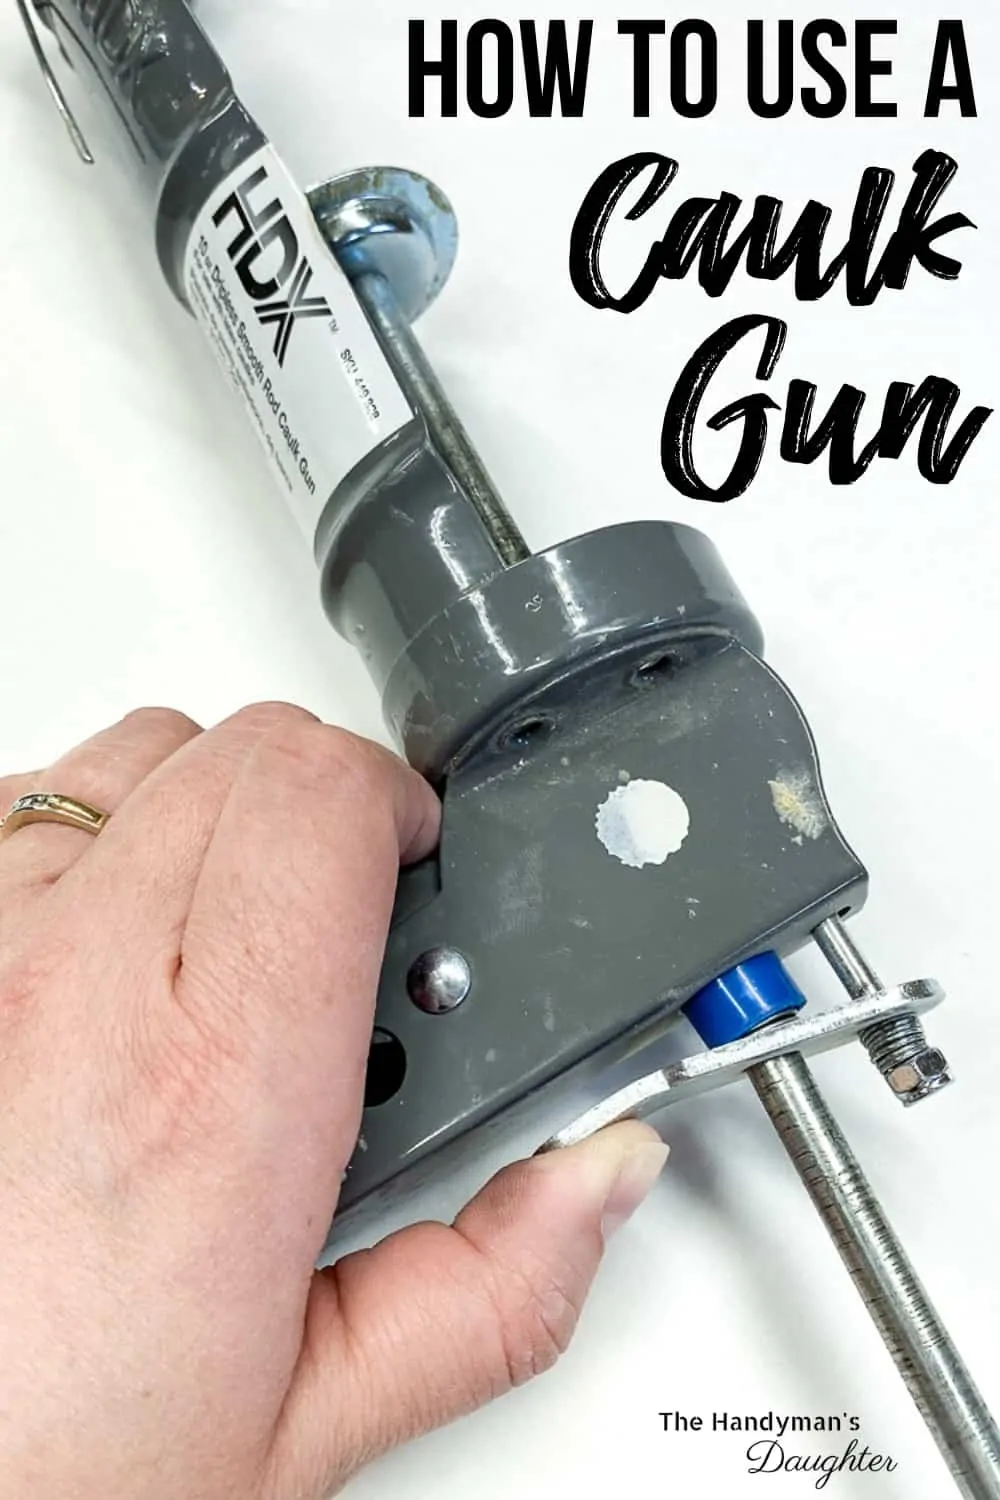 how to use a caulk gun with hand pressing the trigger